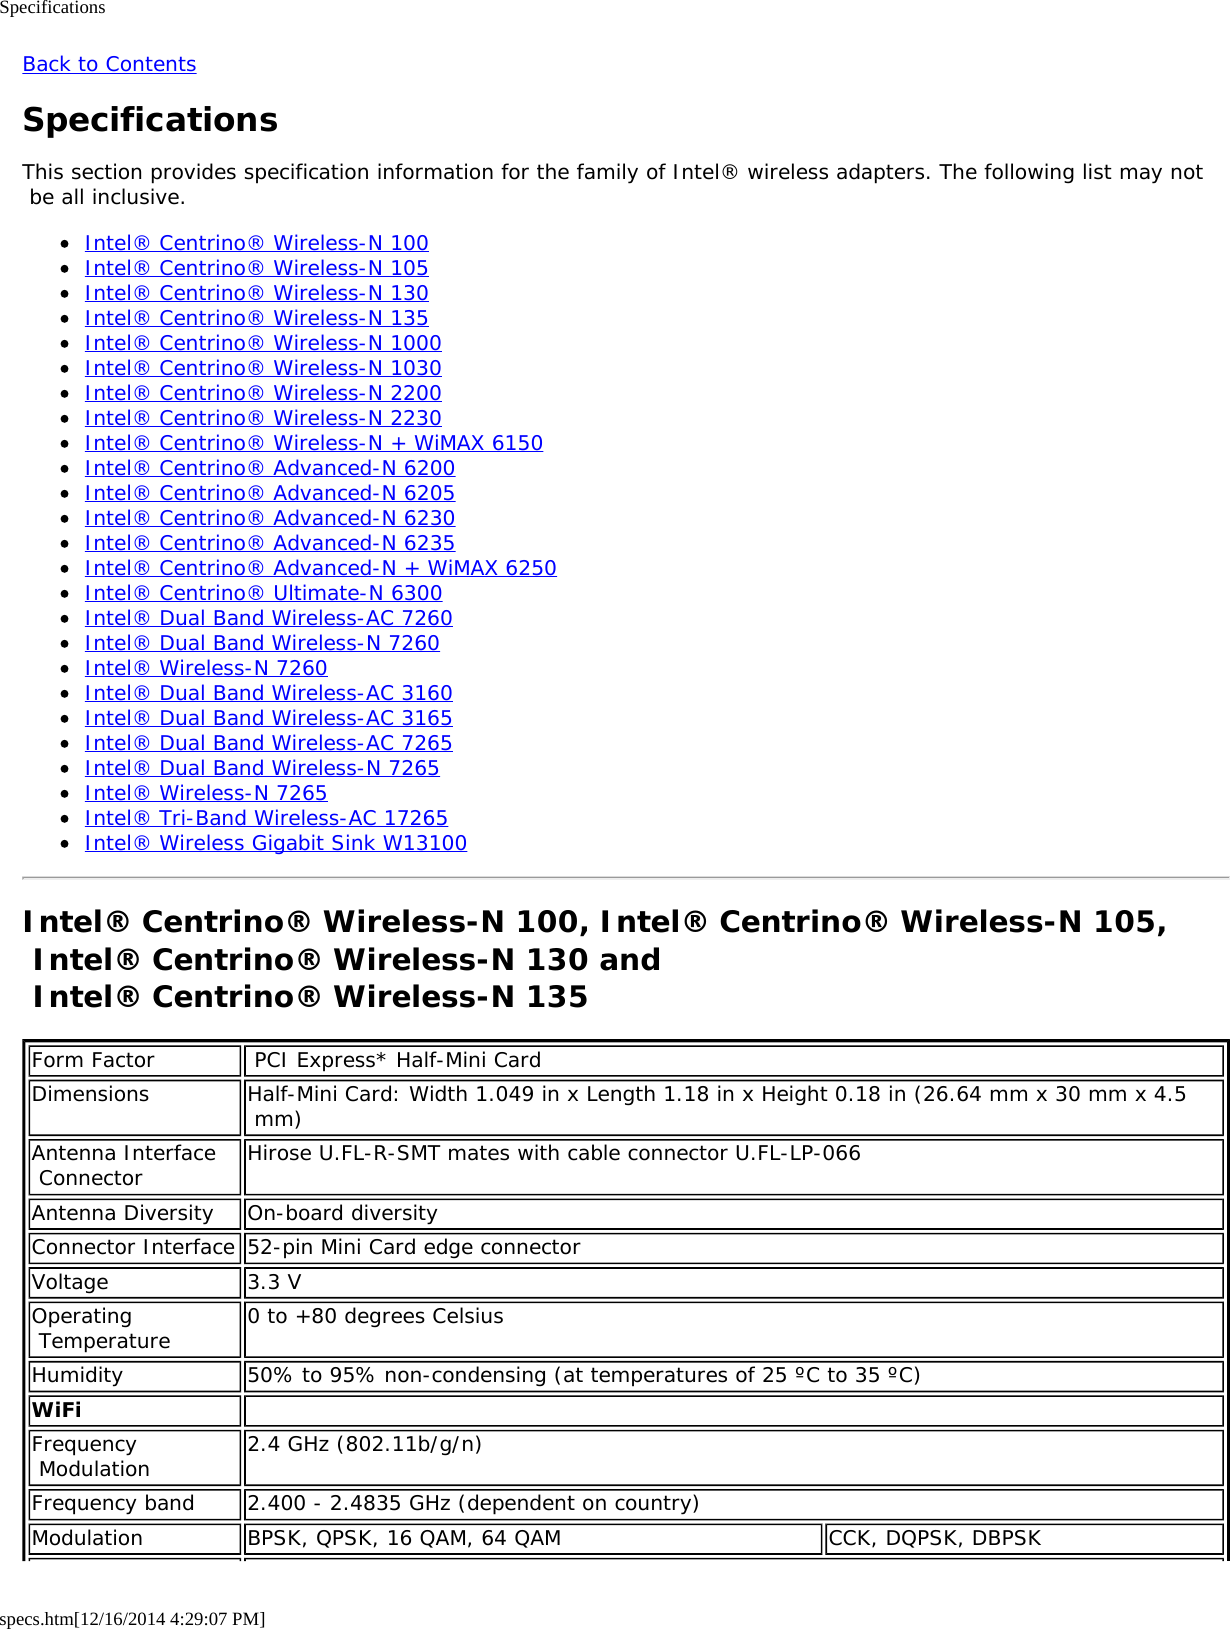 Specificationsspecs.htm[12/16/2014 4:29:07 PM]Back to ContentsSpecificationsThis section provides specification information for the family of Intel® wireless adapters. The following list may not be all inclusive.Intel® Centrino® Wireless-N 100Intel® Centrino® Wireless-N 105Intel® Centrino® Wireless-N 130Intel® Centrino® Wireless-N 135Intel® Centrino® Wireless-N 1000Intel® Centrino® Wireless-N 1030Intel® Centrino® Wireless-N 2200Intel® Centrino® Wireless-N 2230Intel® Centrino® Wireless-N + WiMAX 6150Intel® Centrino® Advanced-N 6200Intel® Centrino® Advanced-N 6205Intel® Centrino® Advanced-N 6230Intel® Centrino® Advanced-N 6235Intel® Centrino® Advanced-N + WiMAX 6250Intel® Centrino® Ultimate-N 6300Intel® Dual Band Wireless-AC 7260Intel® Dual Band Wireless-N 7260Intel® Wireless-N 7260Intel® Dual Band Wireless-AC 3160Intel® Dual Band Wireless-AC 3165Intel® Dual Band Wireless-AC 7265Intel® Dual Band Wireless-N 7265Intel® Wireless-N 7265Intel® Tri-Band Wireless-AC 17265Intel® Wireless Gigabit Sink W13100Intel® Centrino® Wireless-N 100, Intel® Centrino® Wireless-N 105, Intel® Centrino® Wireless-N 130 and  Intel® Centrino® Wireless-N 135Form Factor  PCI Express* Half-Mini CardDimensions Half-Mini Card: Width 1.049 in x Length 1.18 in x Height 0.18 in (26.64 mm x 30 mm x 4.5 mm)Antenna Interface Connector Hirose U.FL-R-SMT mates with cable connector U.FL-LP-066Antenna Diversity On-board diversityConnector Interface 52-pin Mini Card edge connectorVoltage 3.3 VOperating Temperature 0 to +80 degrees CelsiusHumidity 50% to 95% non-condensing (at temperatures of 25 ºC to 35 ºC)WiFi  Frequency Modulation 2.4 GHz (802.11b/g/n)Frequency band 2.400 - 2.4835 GHz (dependent on country)Modulation BPSK, QPSK, 16 QAM, 64 QAM CCK, DQPSK, DBPSK